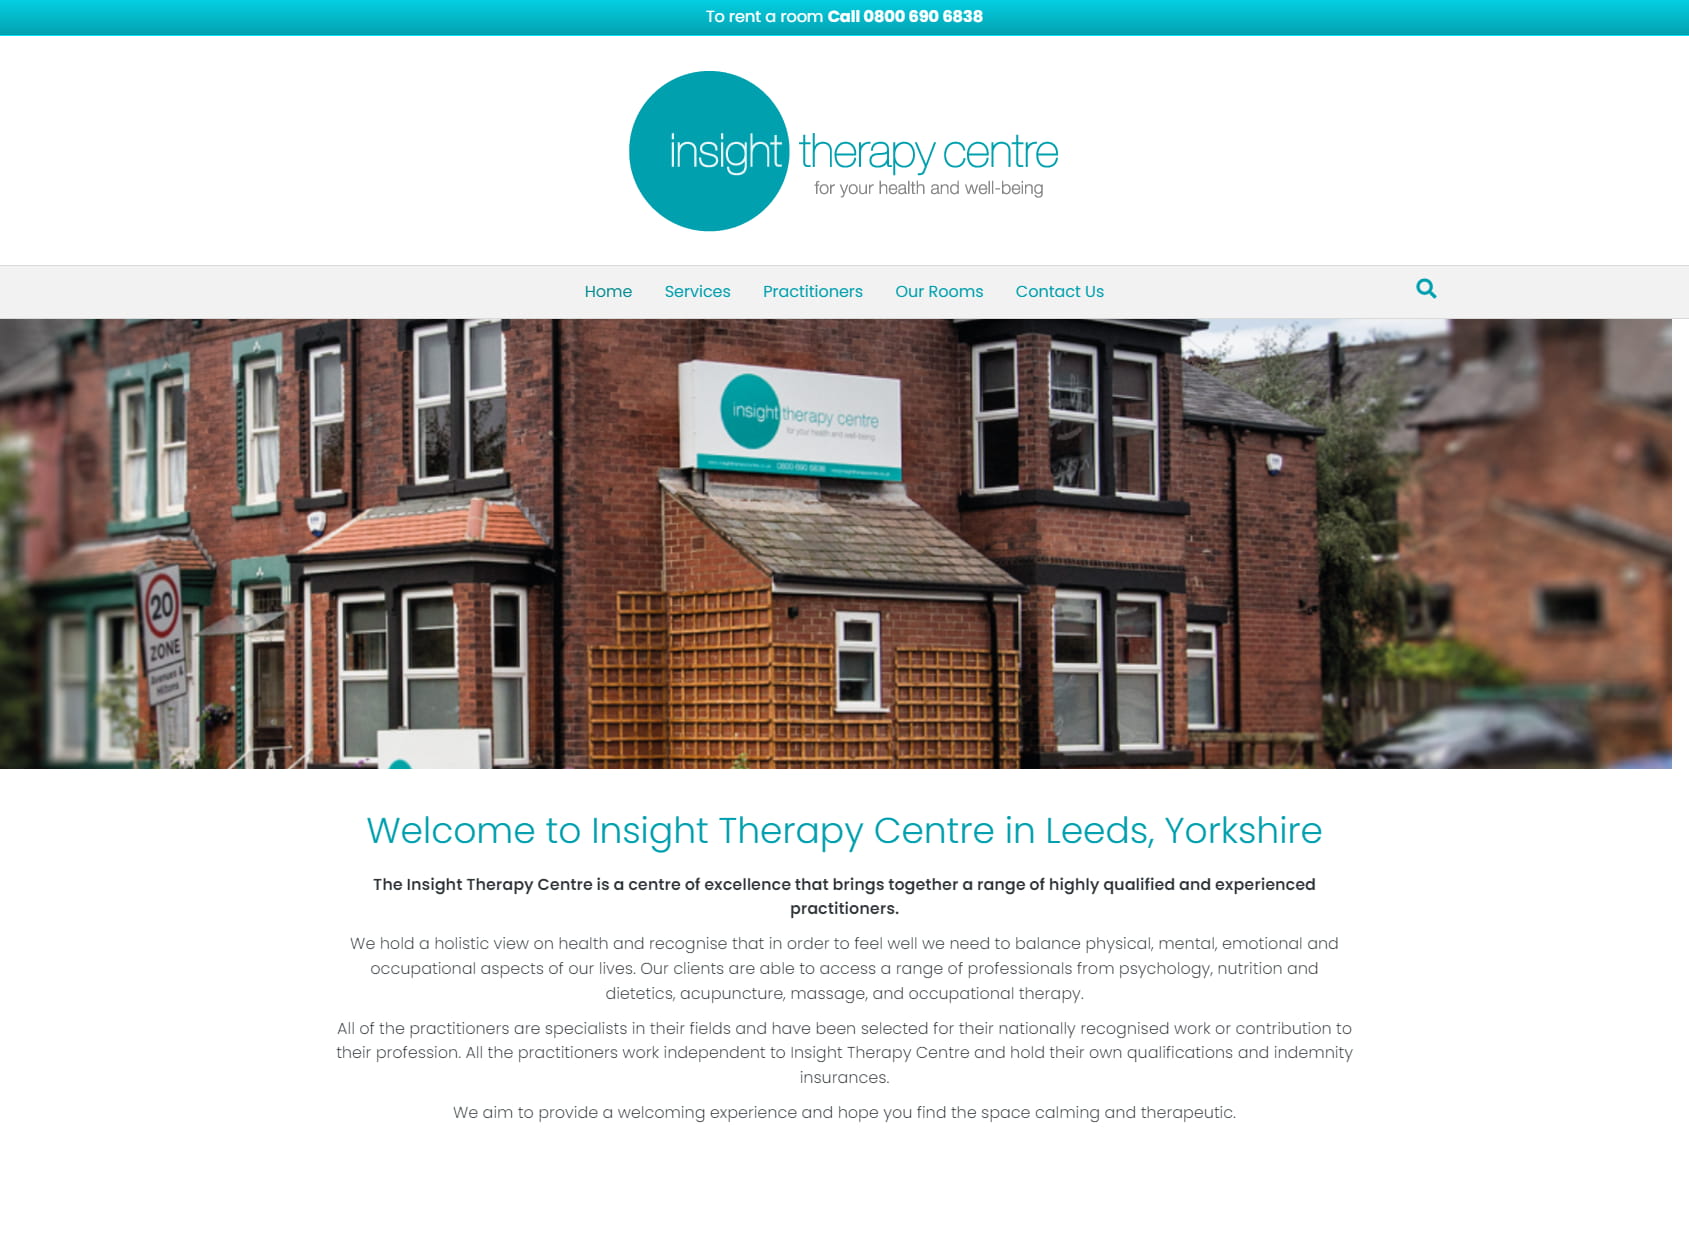 Insight Therapy Centre